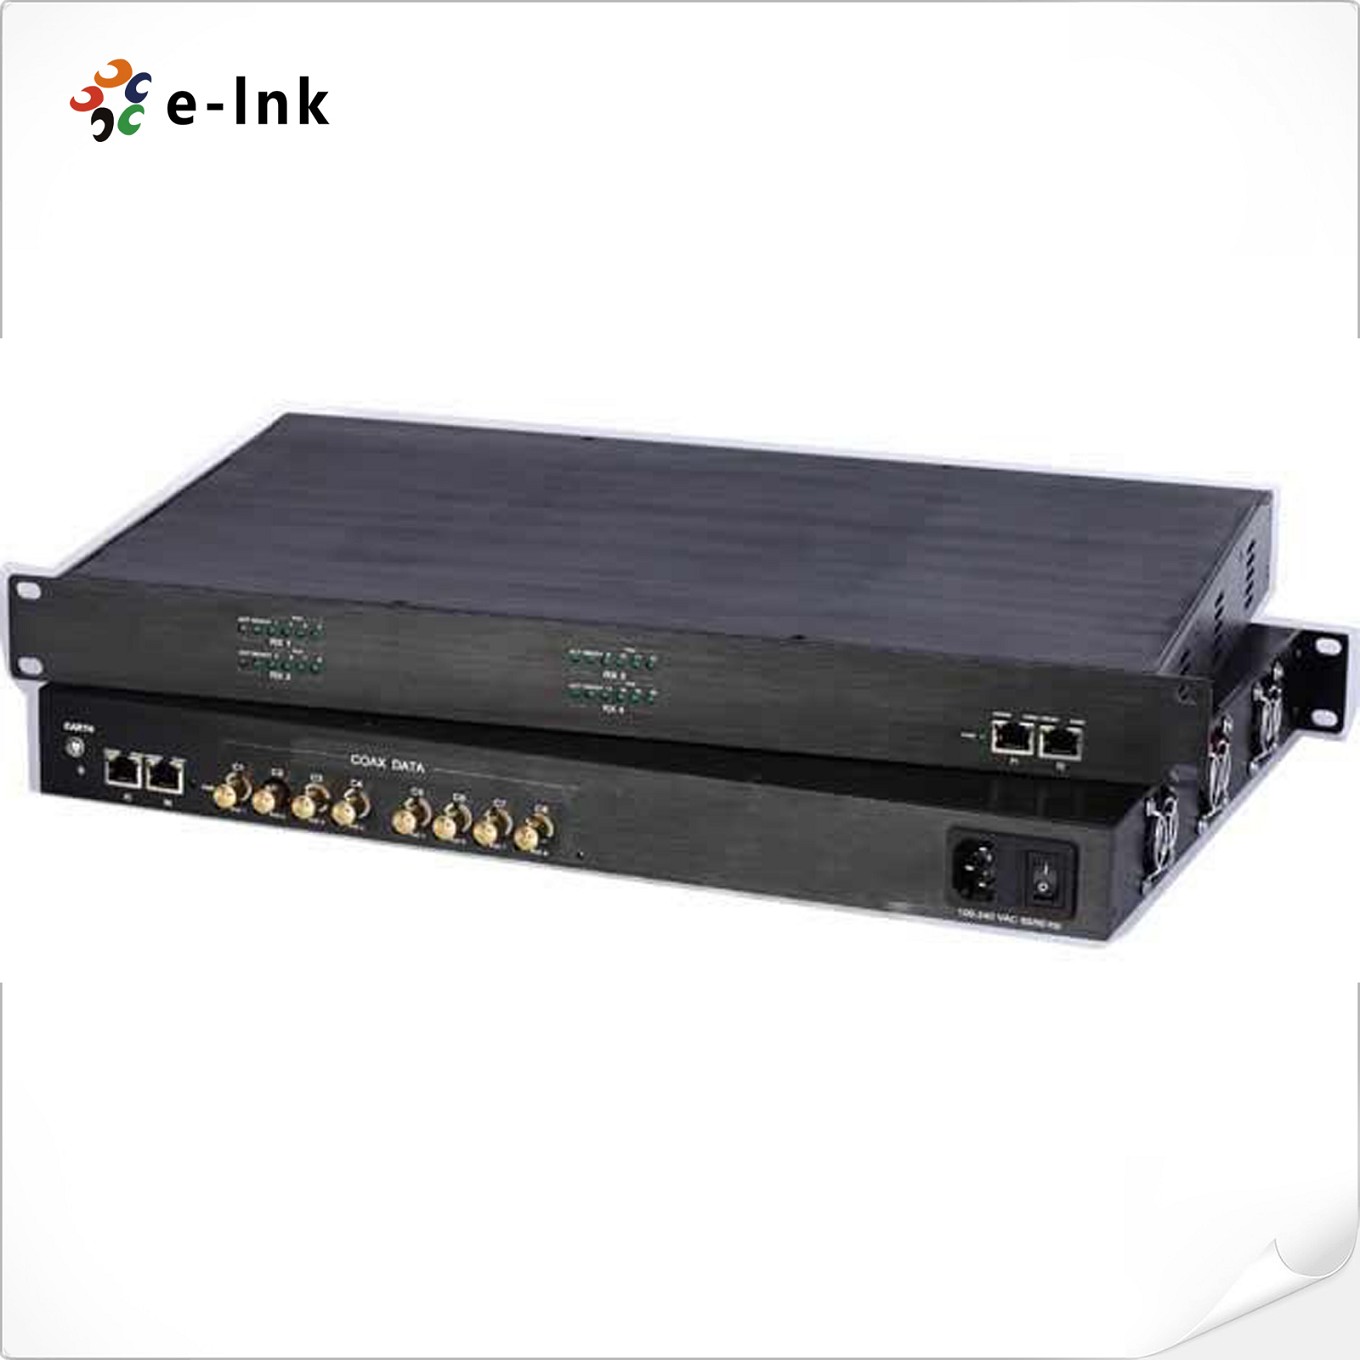 Receiver of 8-port Coax to 4-port 10/100/1000Base-TX Ethernet over Coax Extender with PoC